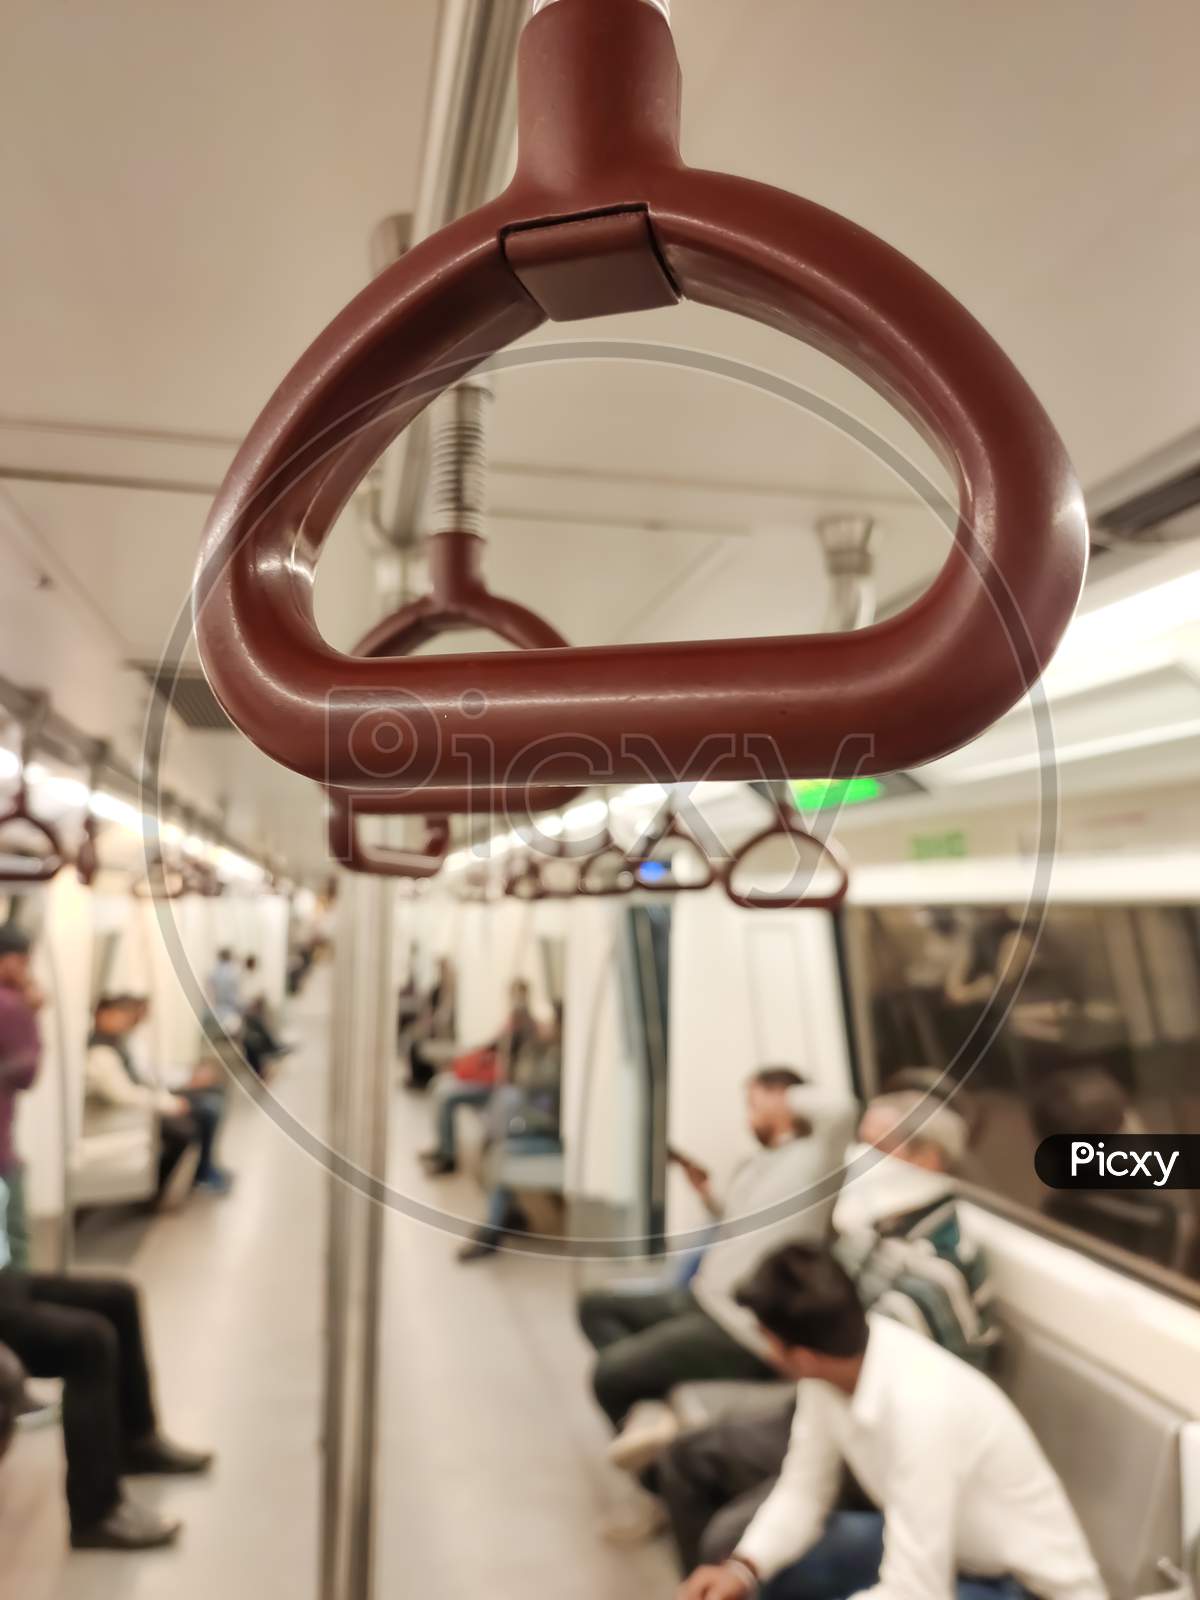 Close up of empty handrails in a Delhi metro train, Handle hand straps in public transportation for passenger safety. Brown hanging handhold for standing passengers in a modern metro train.